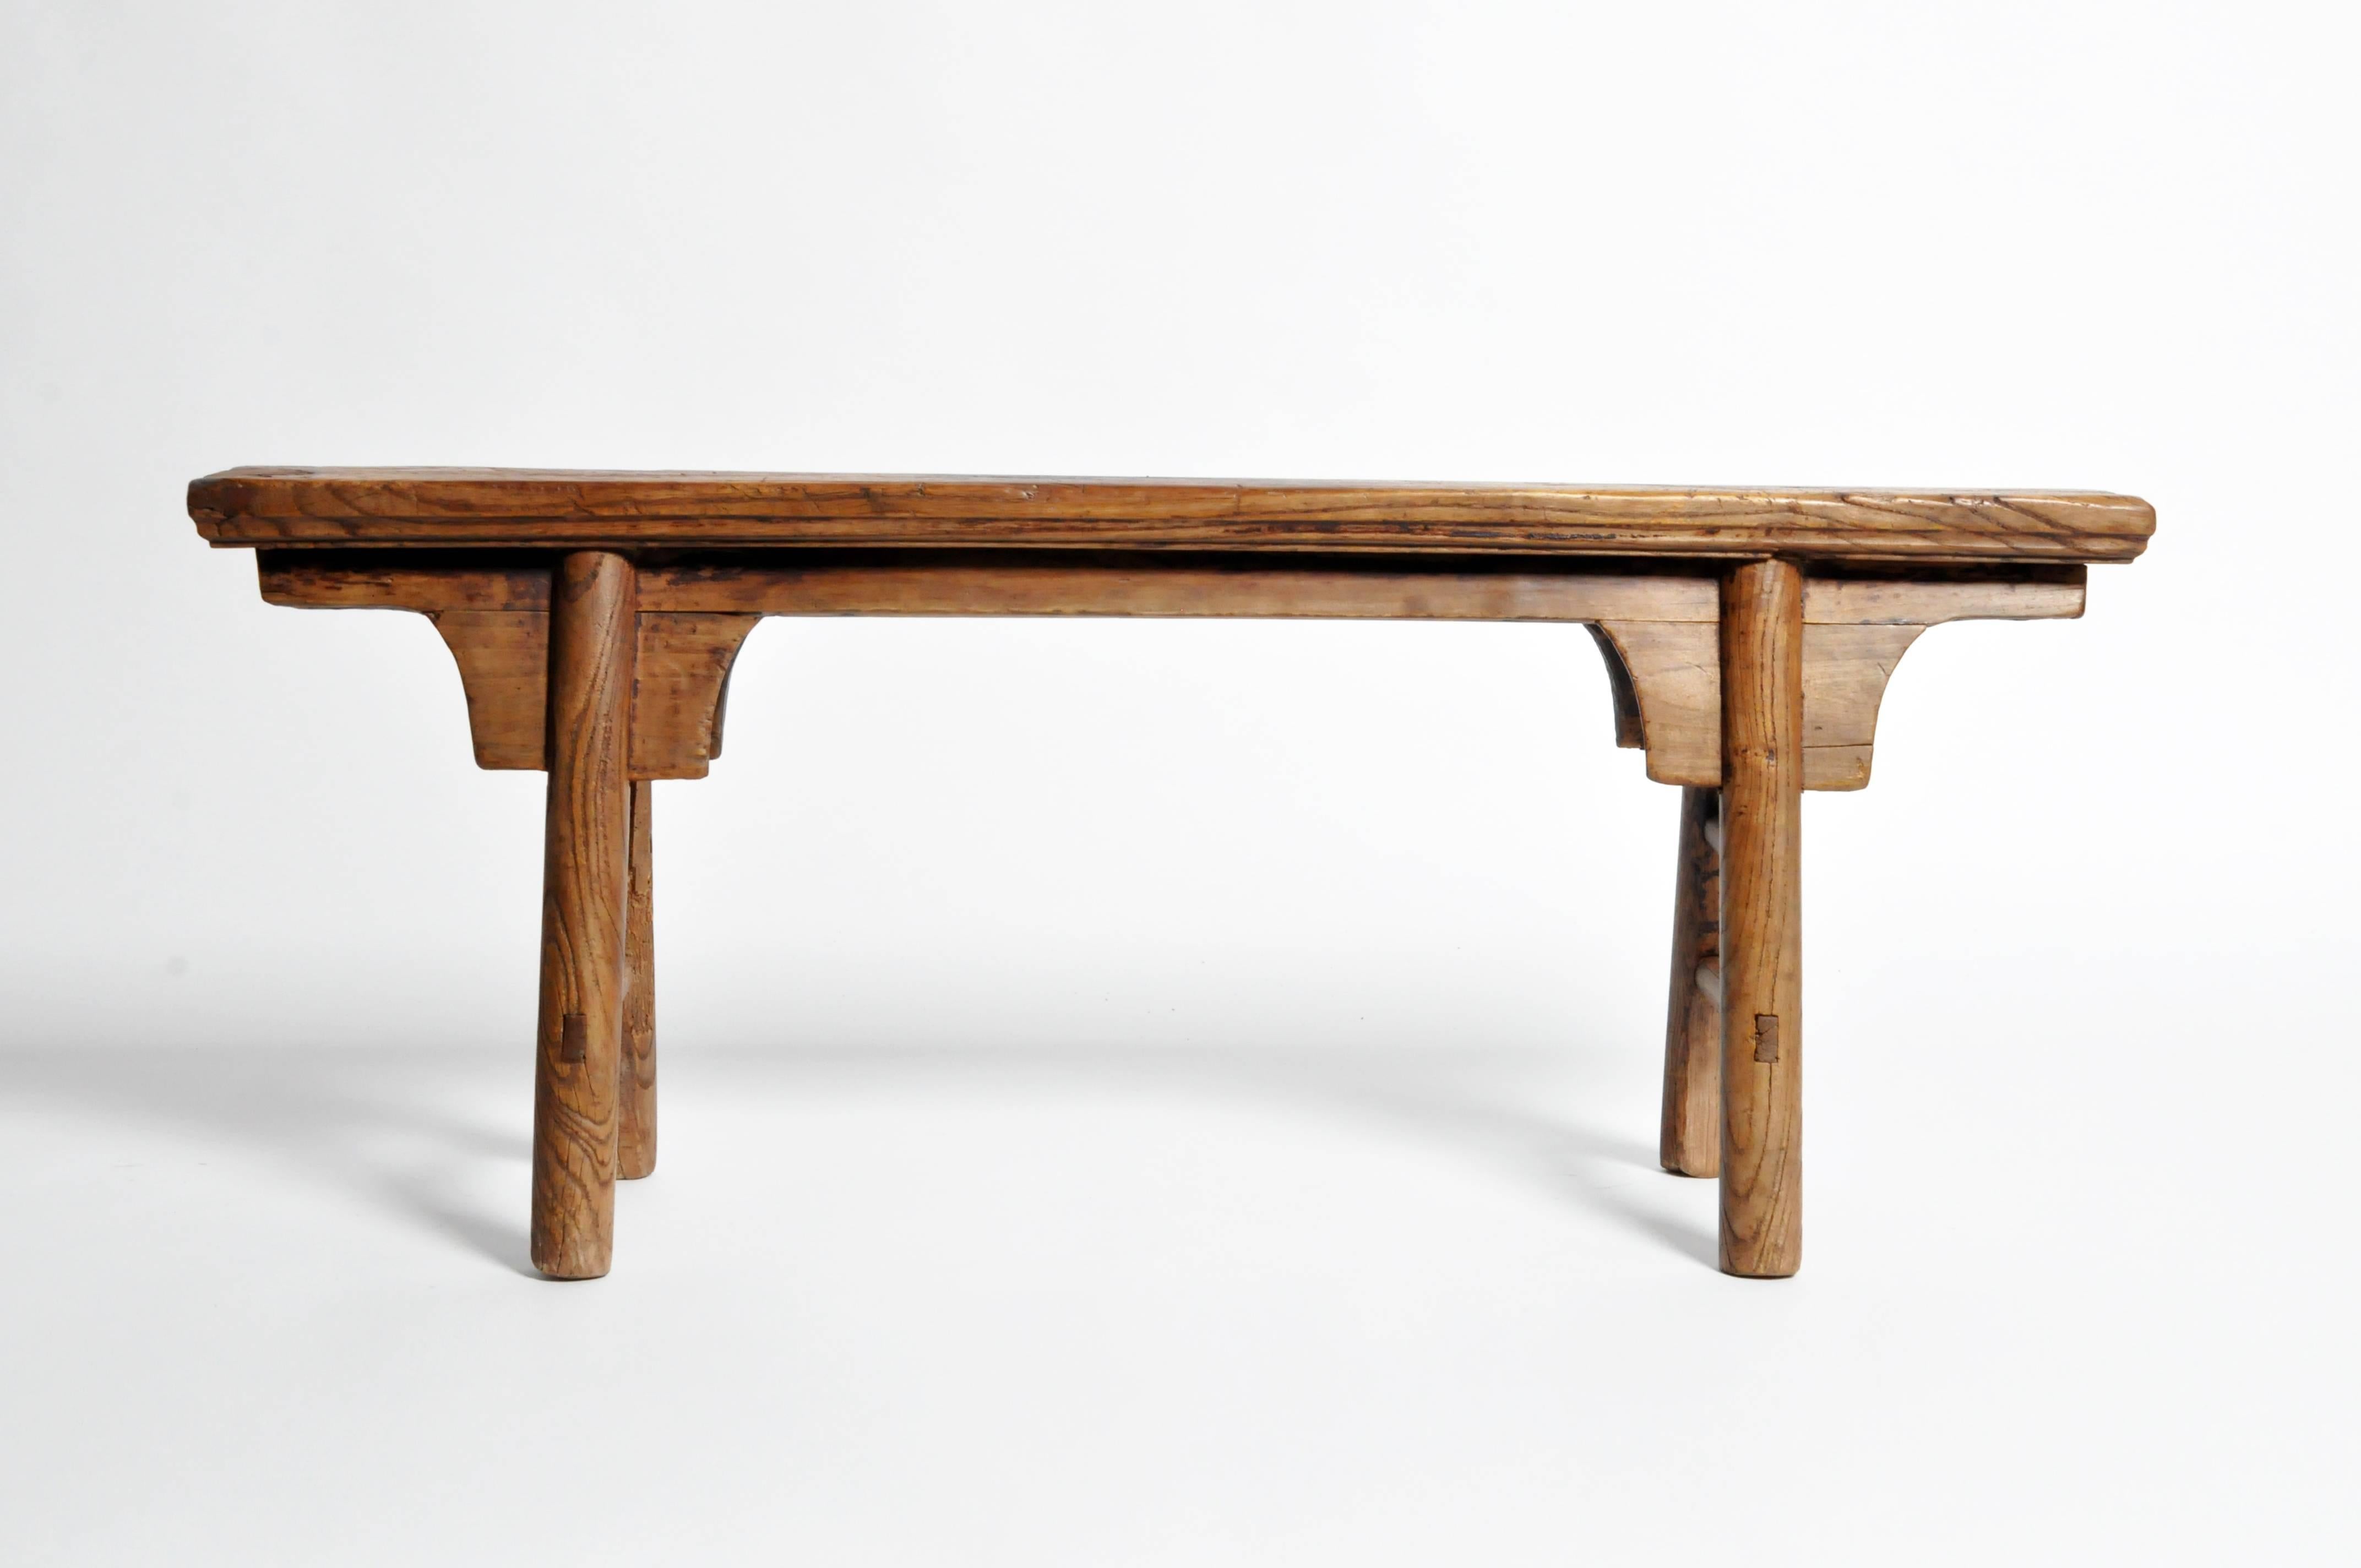 An elmwood bench from Shandong, China that dates back to the Middle Qing dynasty.